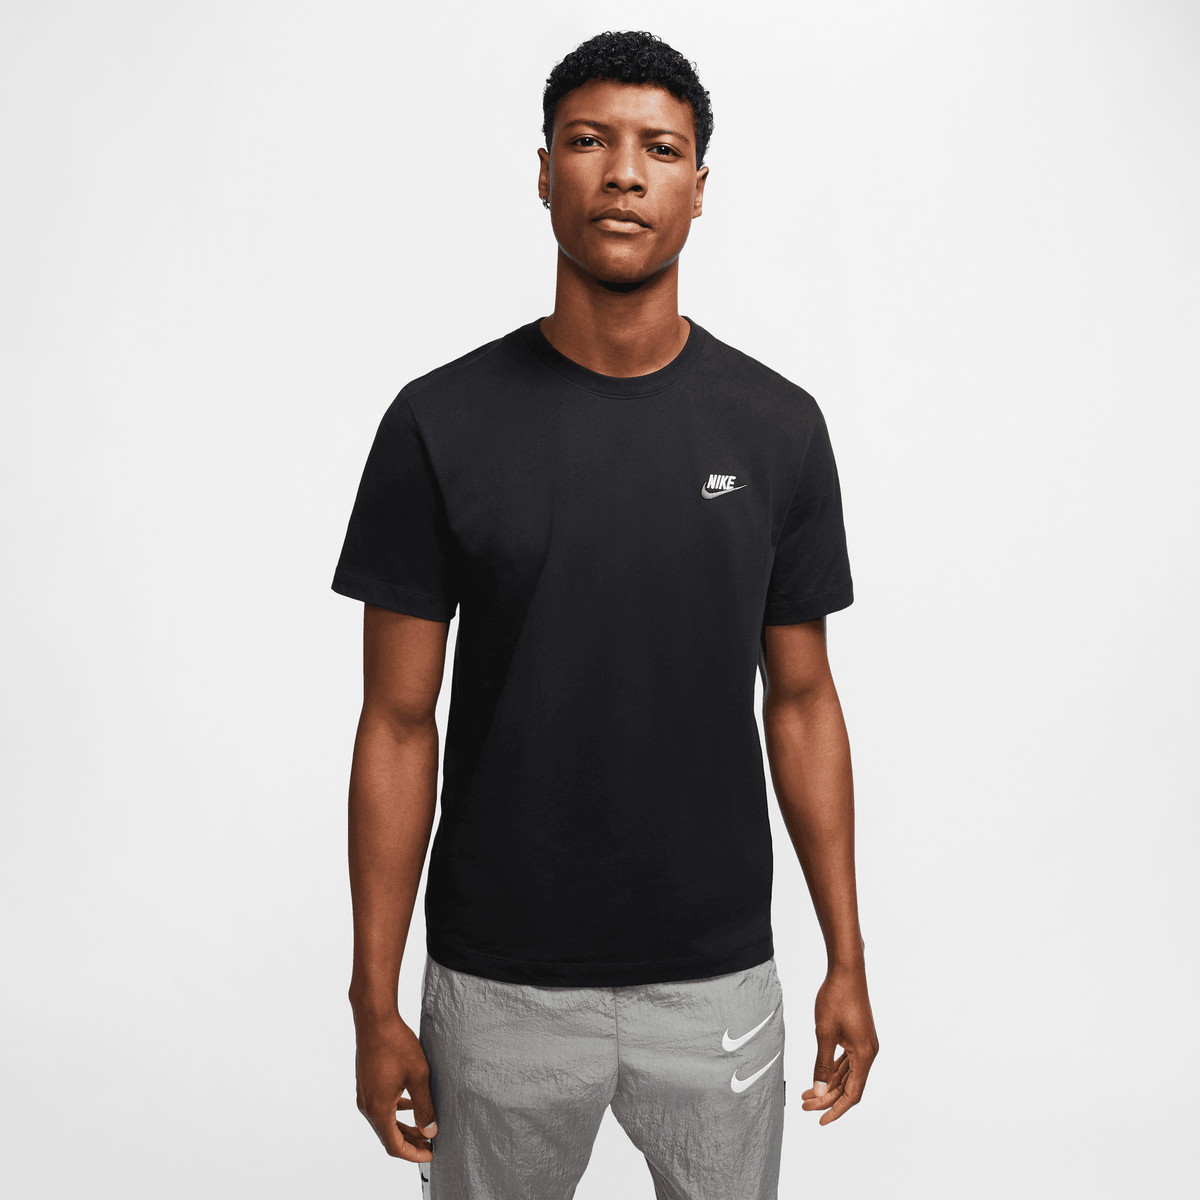 Nike AF1 40th Anniversary T-Shirt - SoleFly